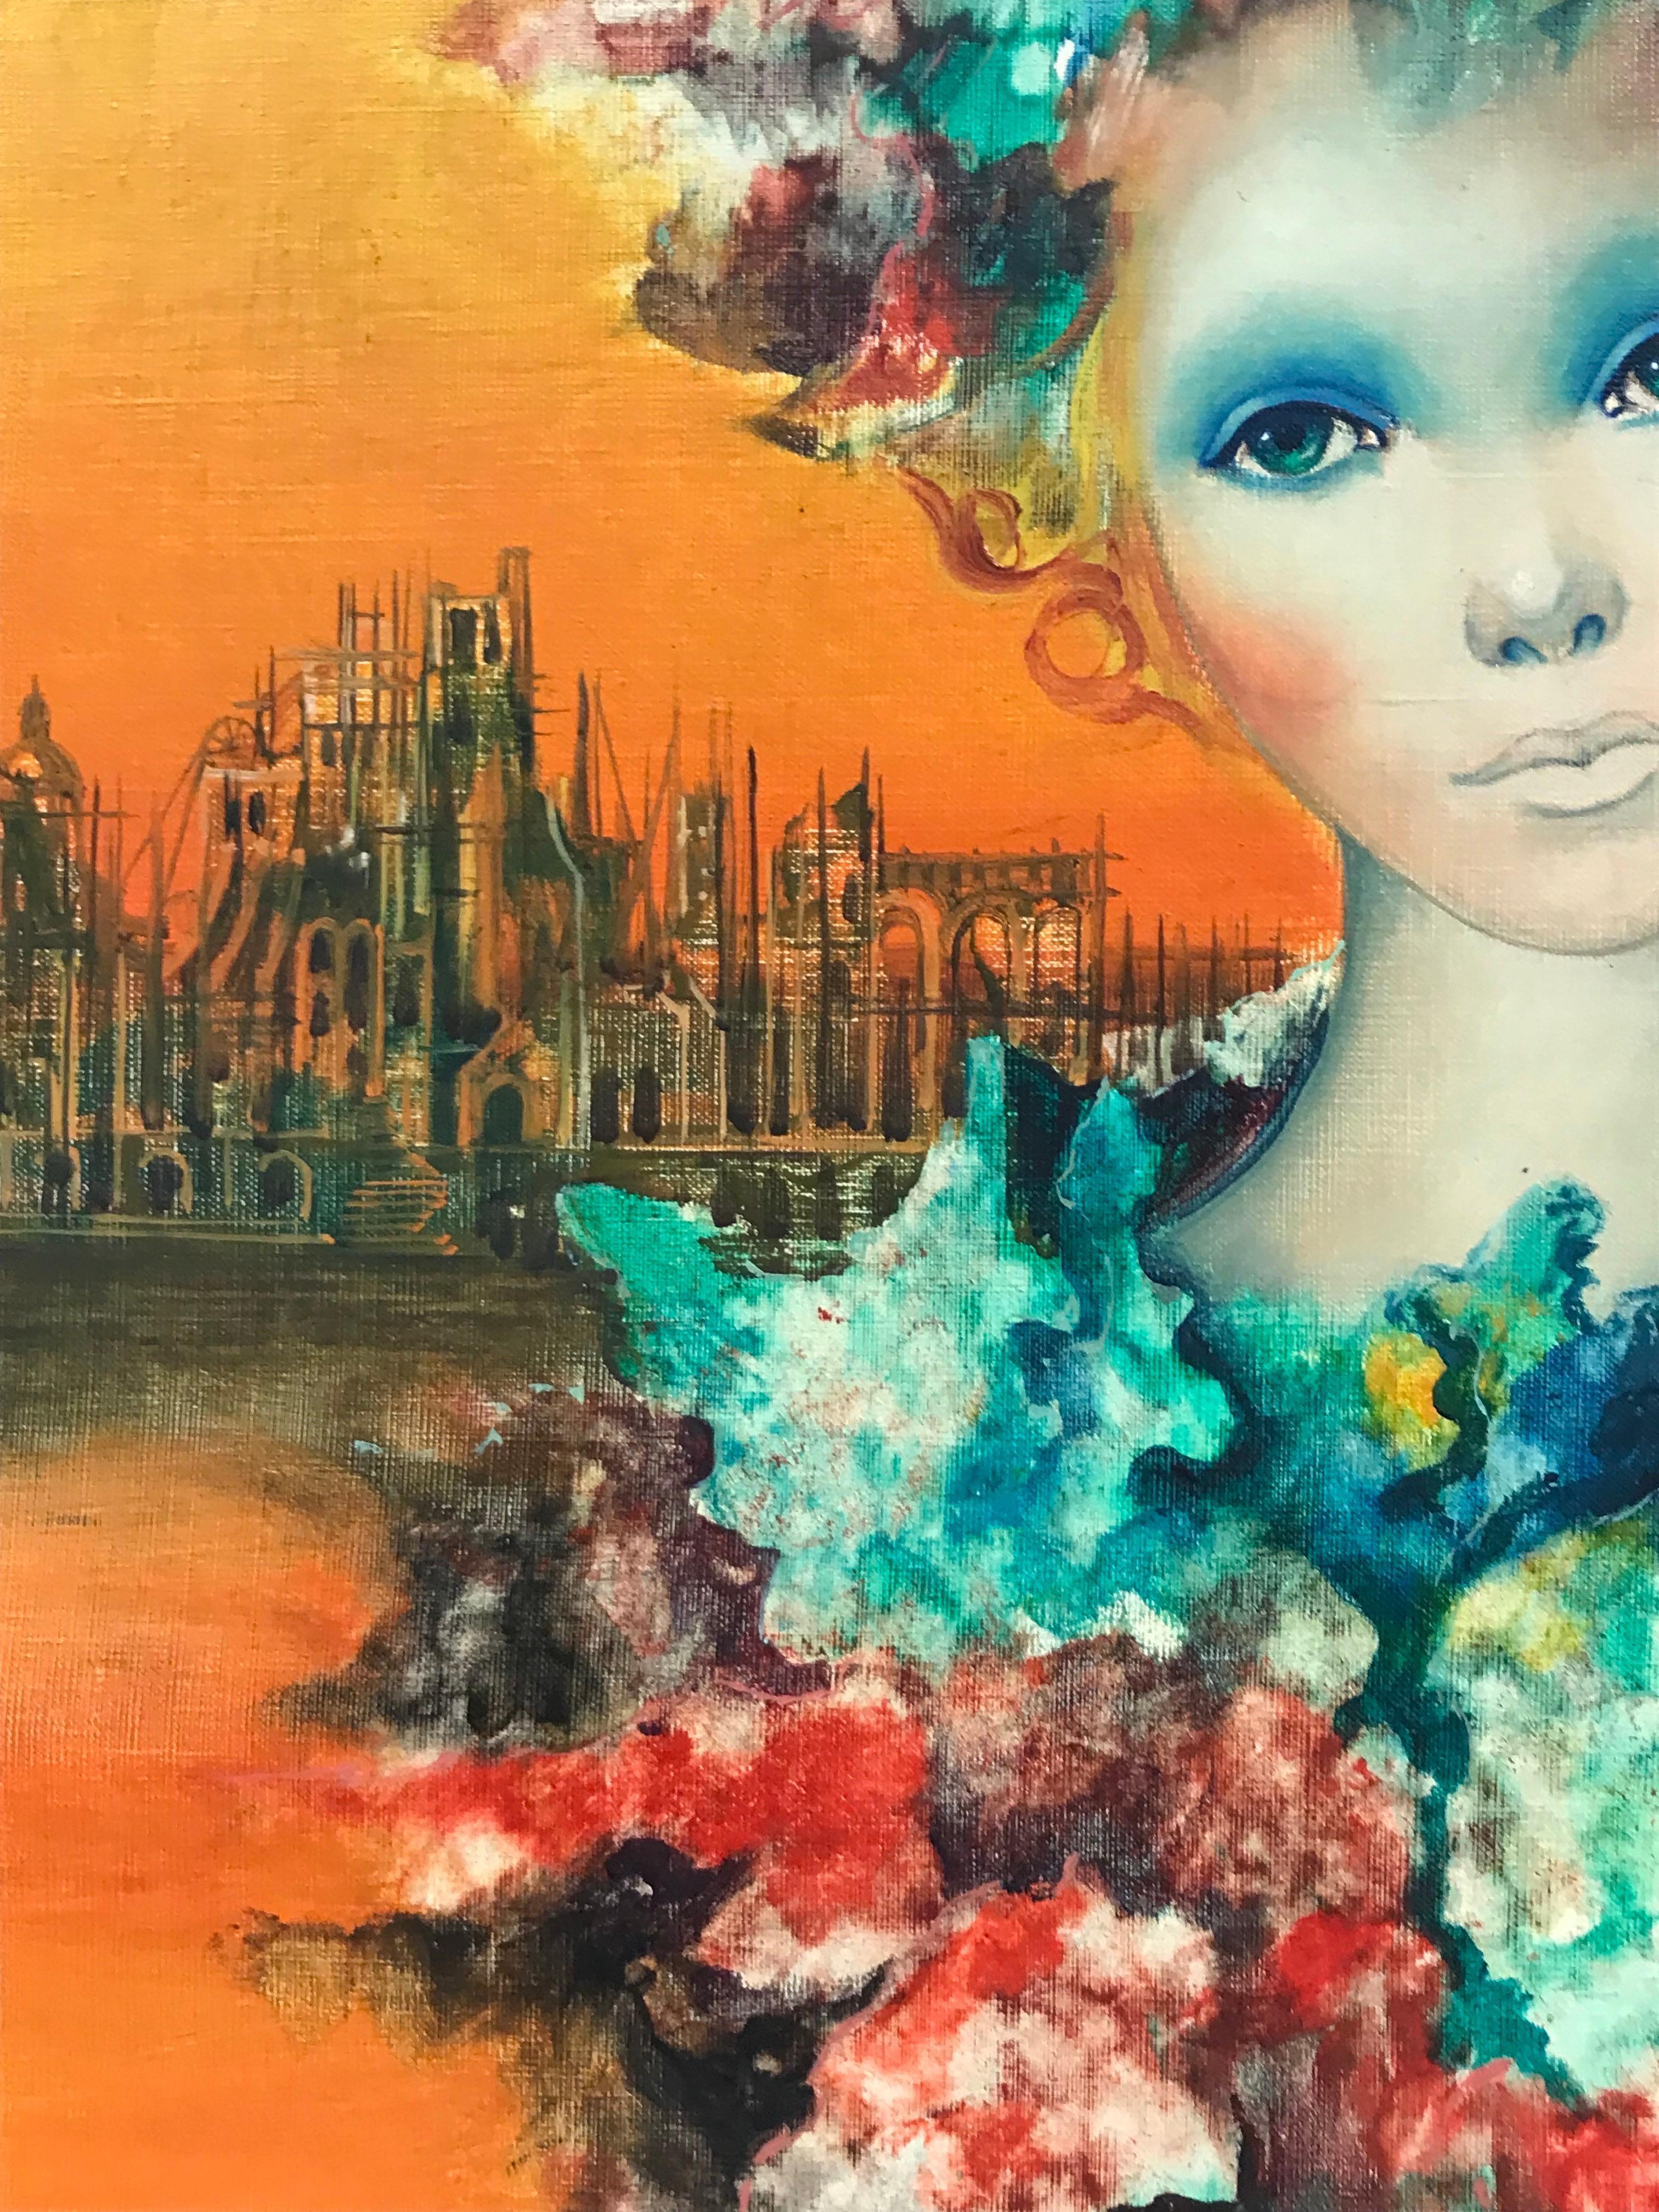 Artist/ School: French School, circa 1960's-1970's, signed lower left. 

Title: Surrealist view of a colorful lady standing before a classical city (Milan?) hazed in orange. 

Medium:  oil on canvas, unframed

canvas: 16 x 12 inches

Provenance: